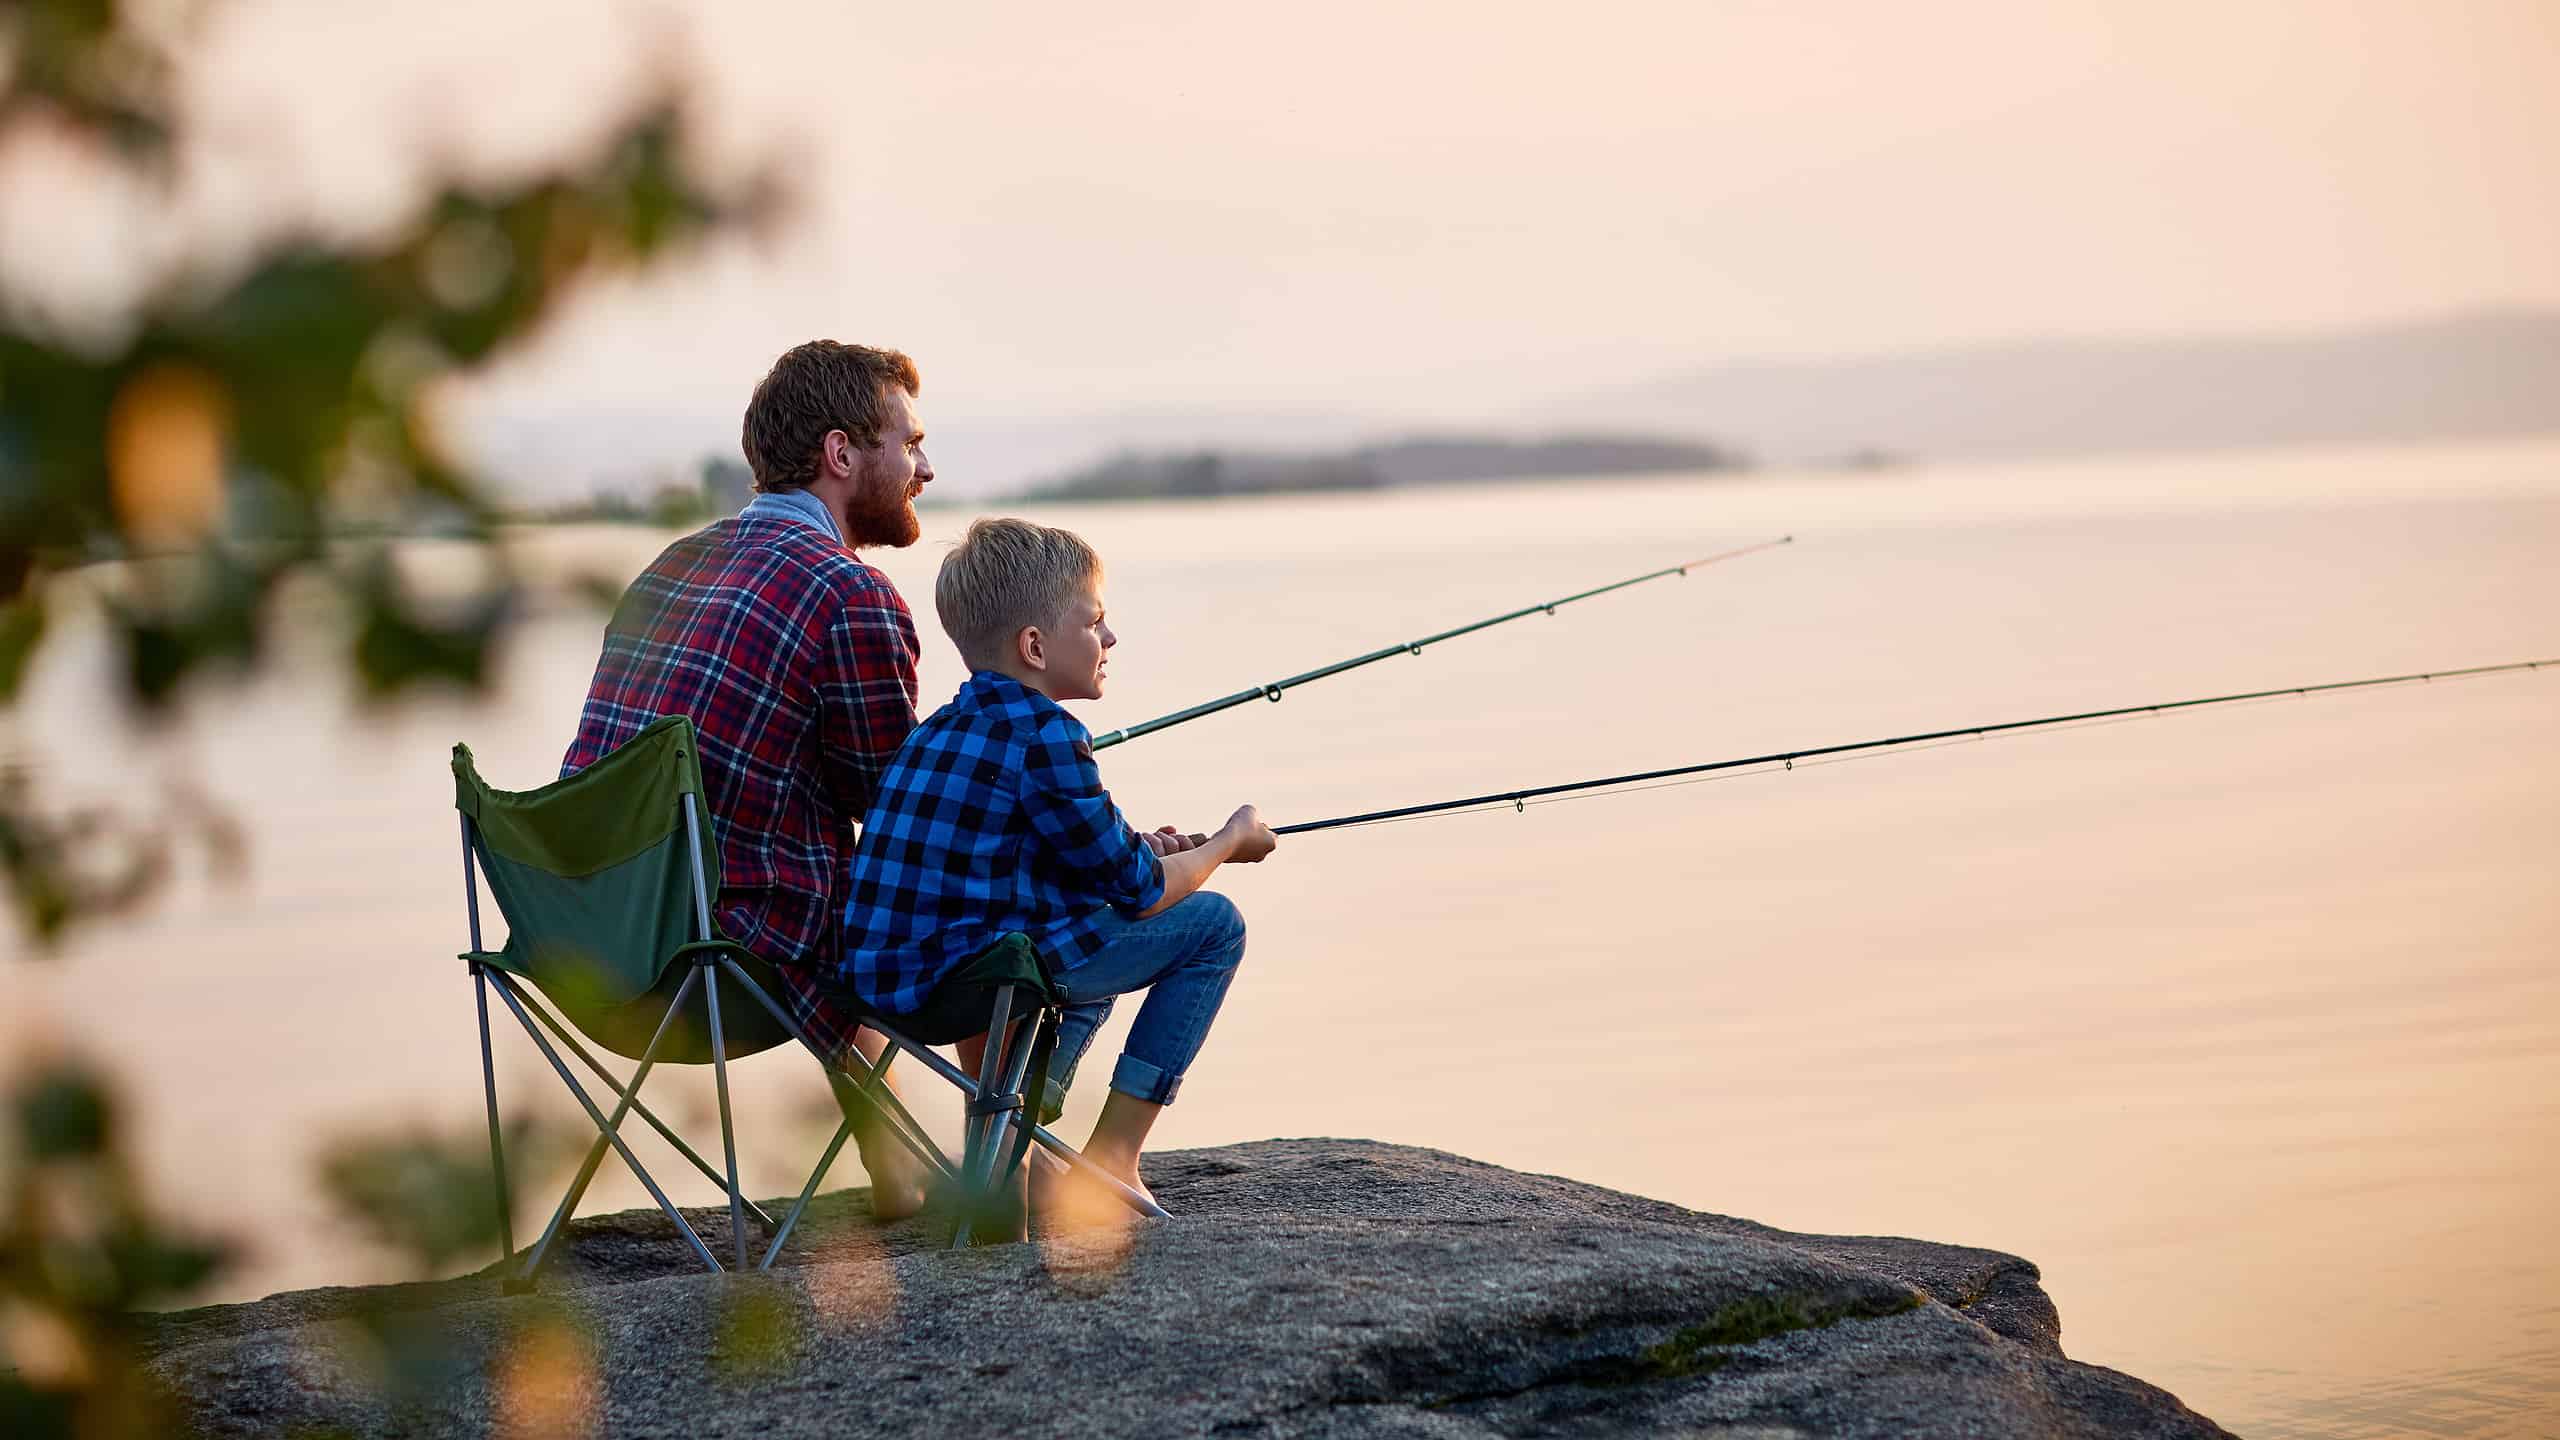 Side view portrait of father and son sitting together on rocks fishing with rods in calm lake waters with landscape of setting sun, both wearing checkered shirts, shot from behind tree